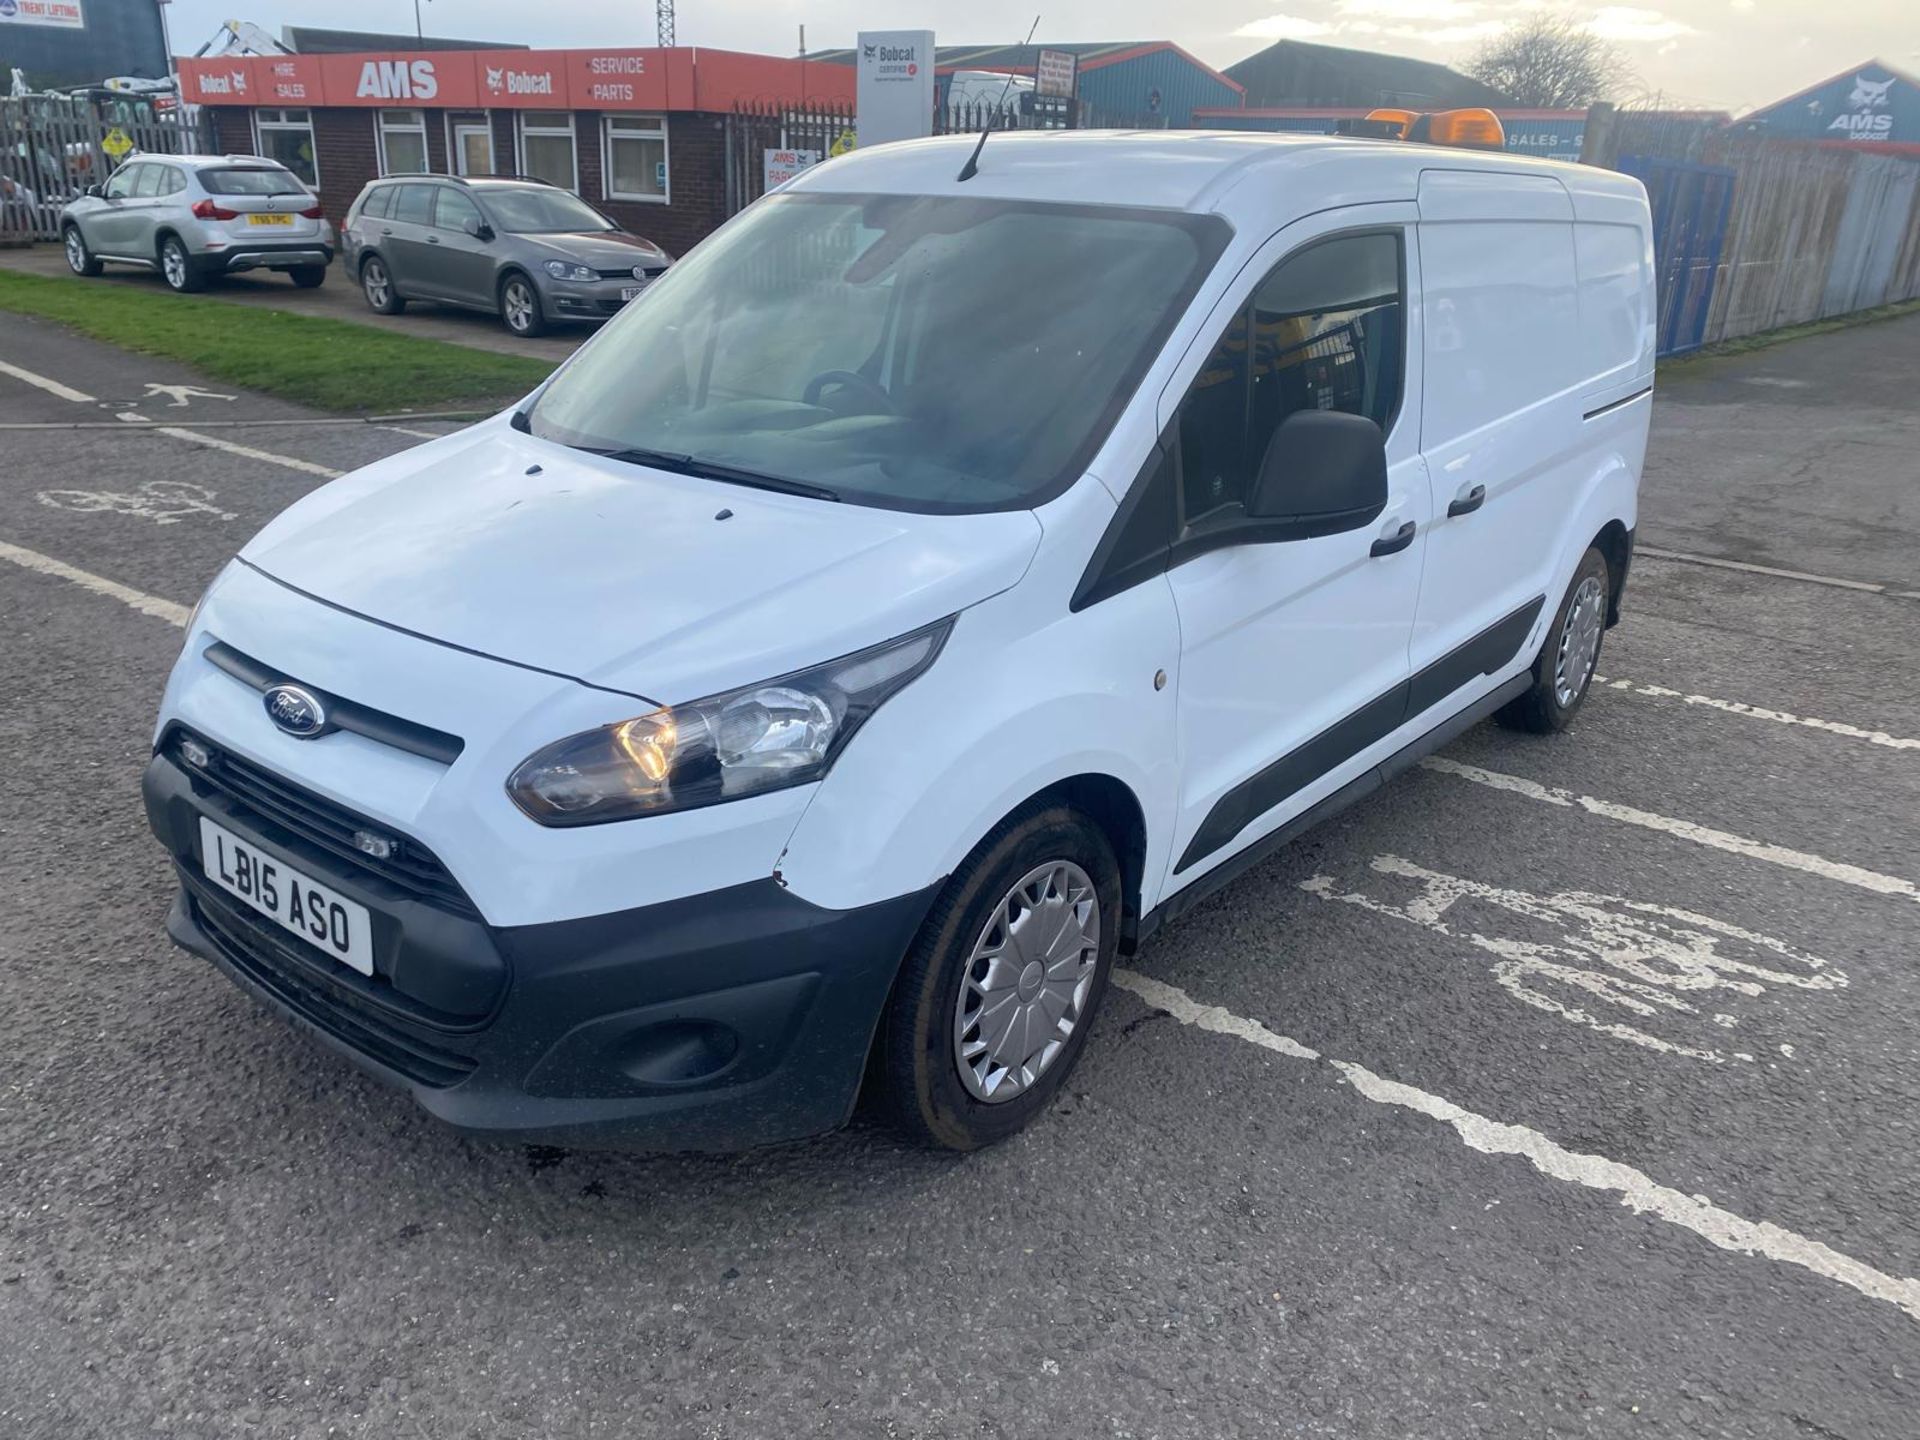 2015 15 FORD TRANSIT CONNECT LWB PANEL VAN - 95K MILES - AIR CON - TWIN SIDE DOORS - EX WATER BOARD